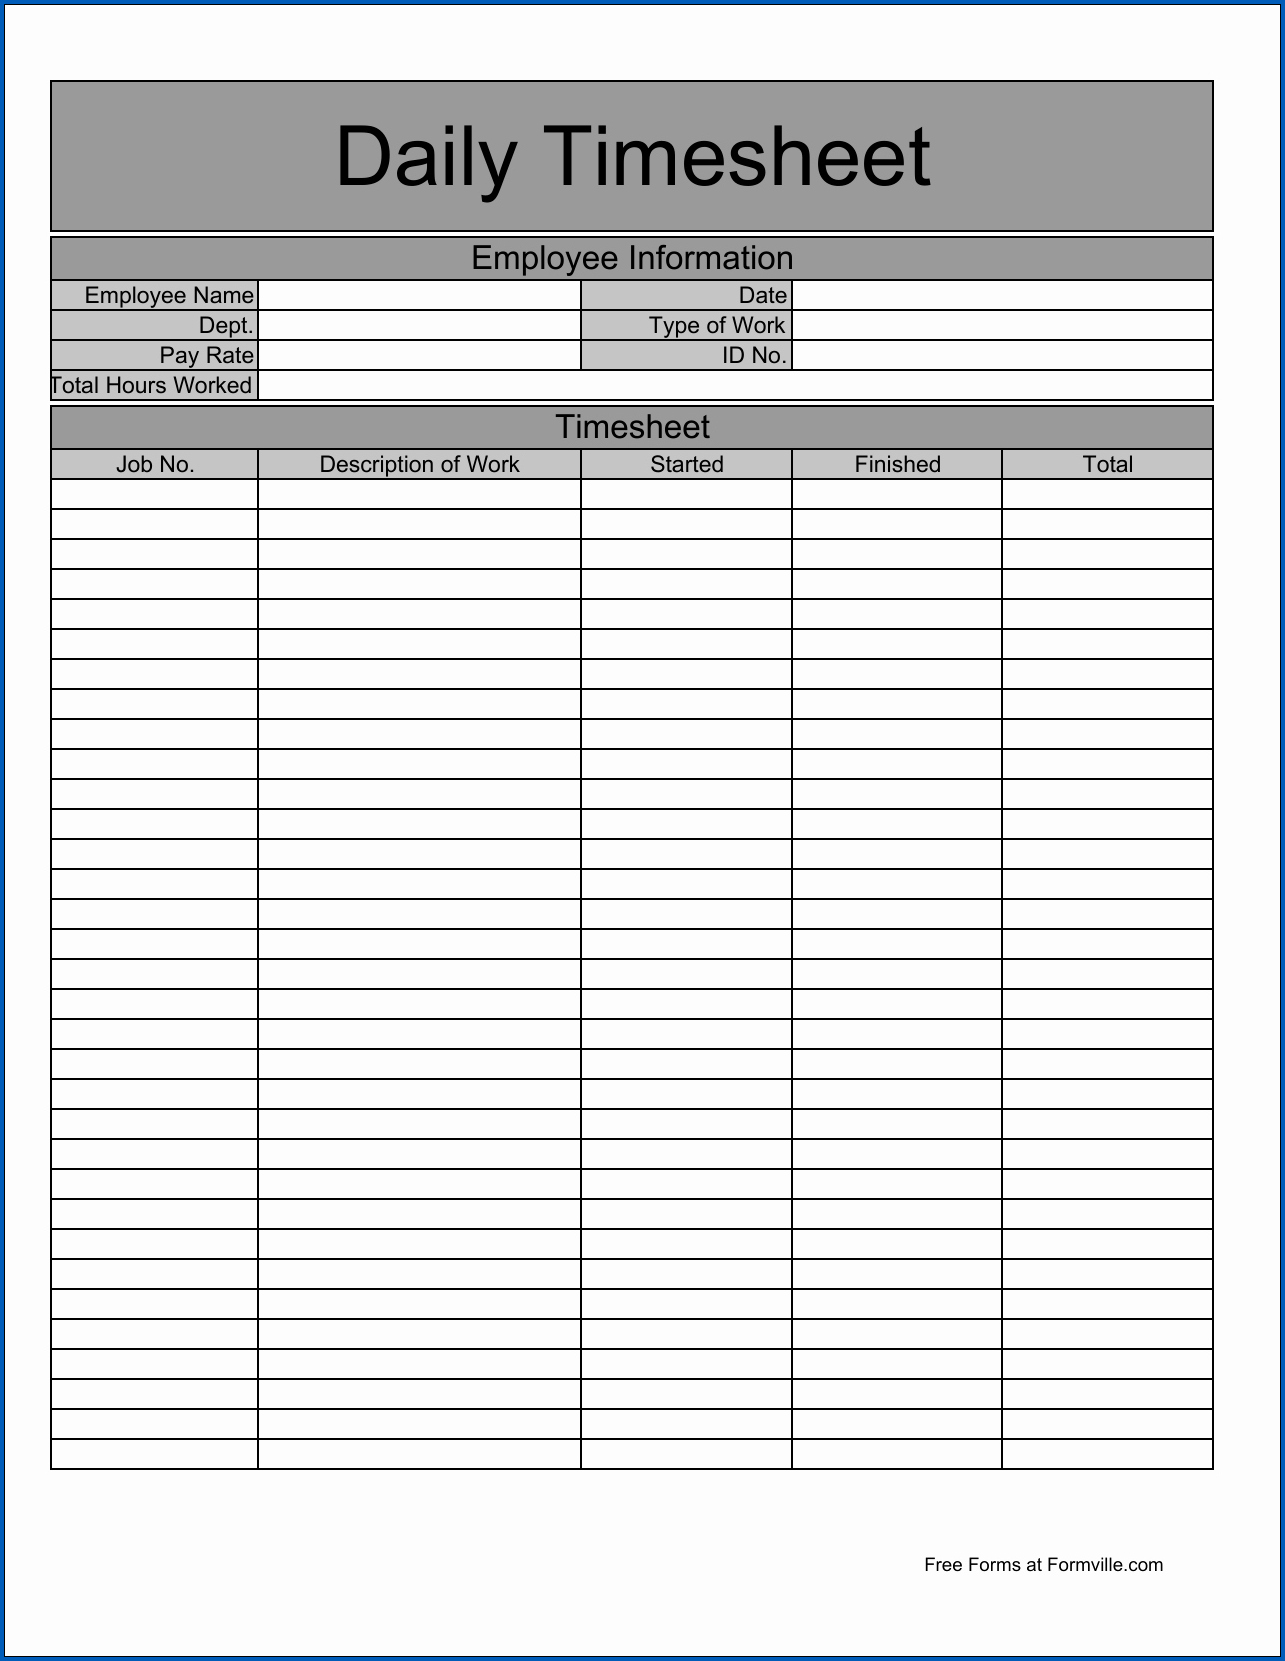 Example of Daily Timesheet Template Excel